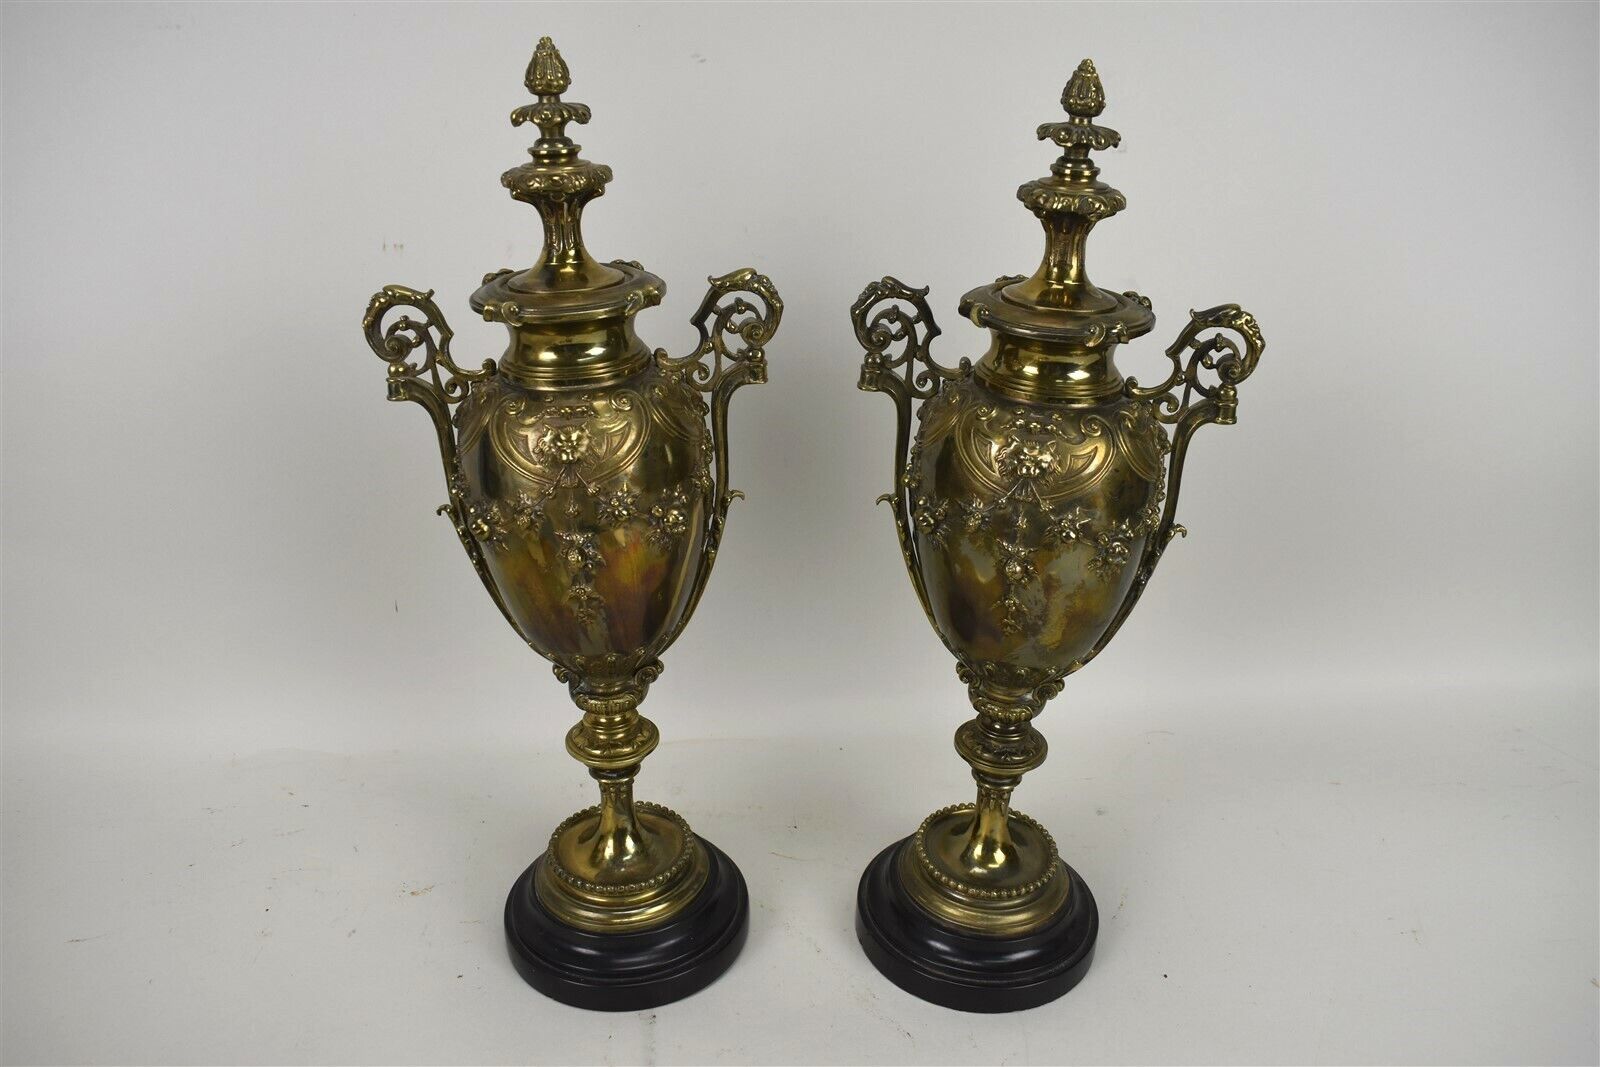 Antique French Cassolettes Urns Onate Heavy Bronze Metal Statues Pair Mantle